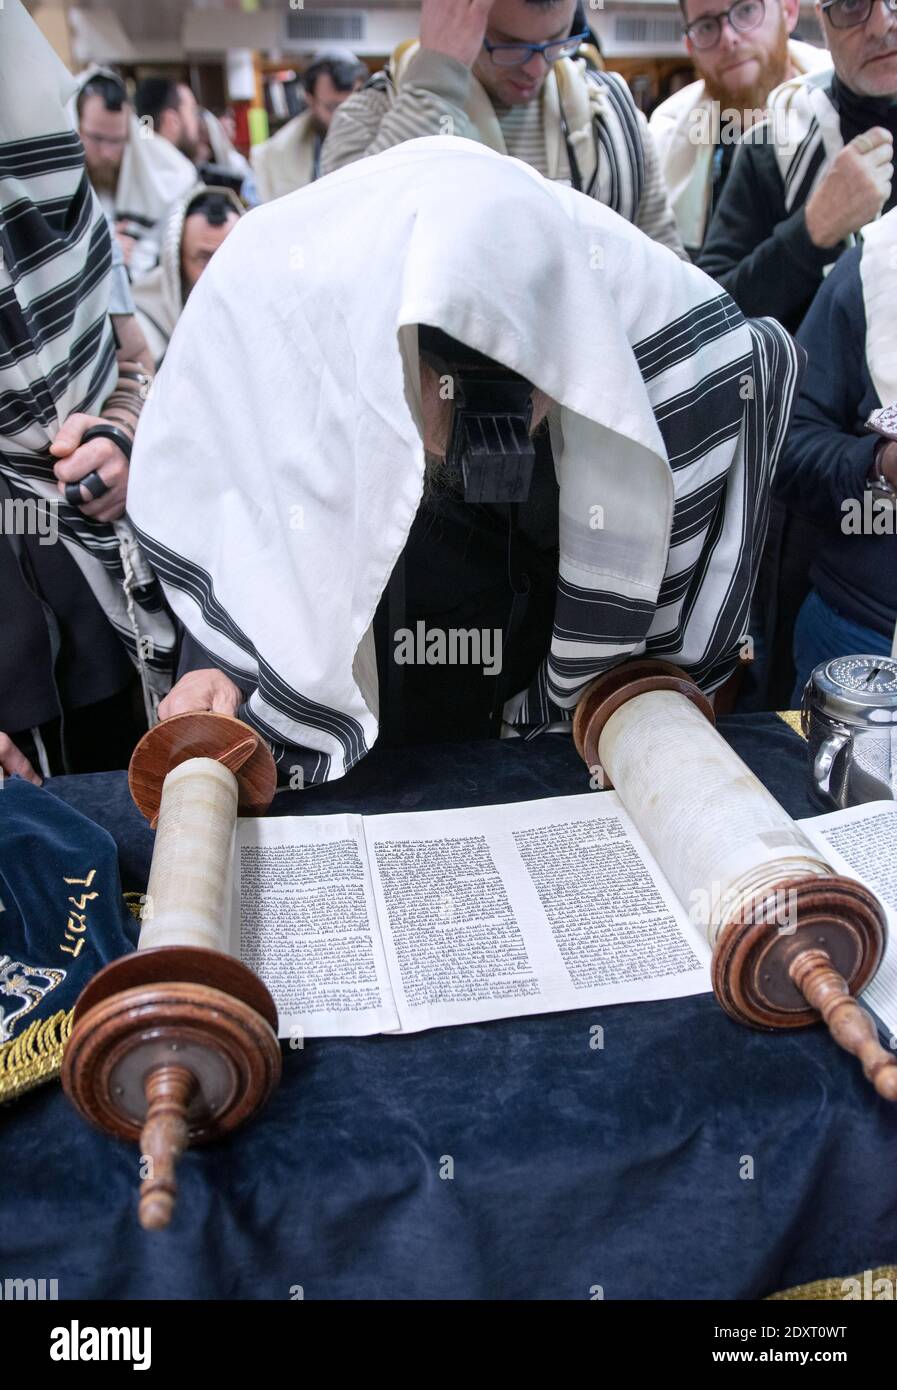 A Hasidic rabbi hidden under his prayer shawl reads from the Torah at a weekday morning service in a synagogue in Crown Heights, Brooklyn, New York Ci. Stock Photo